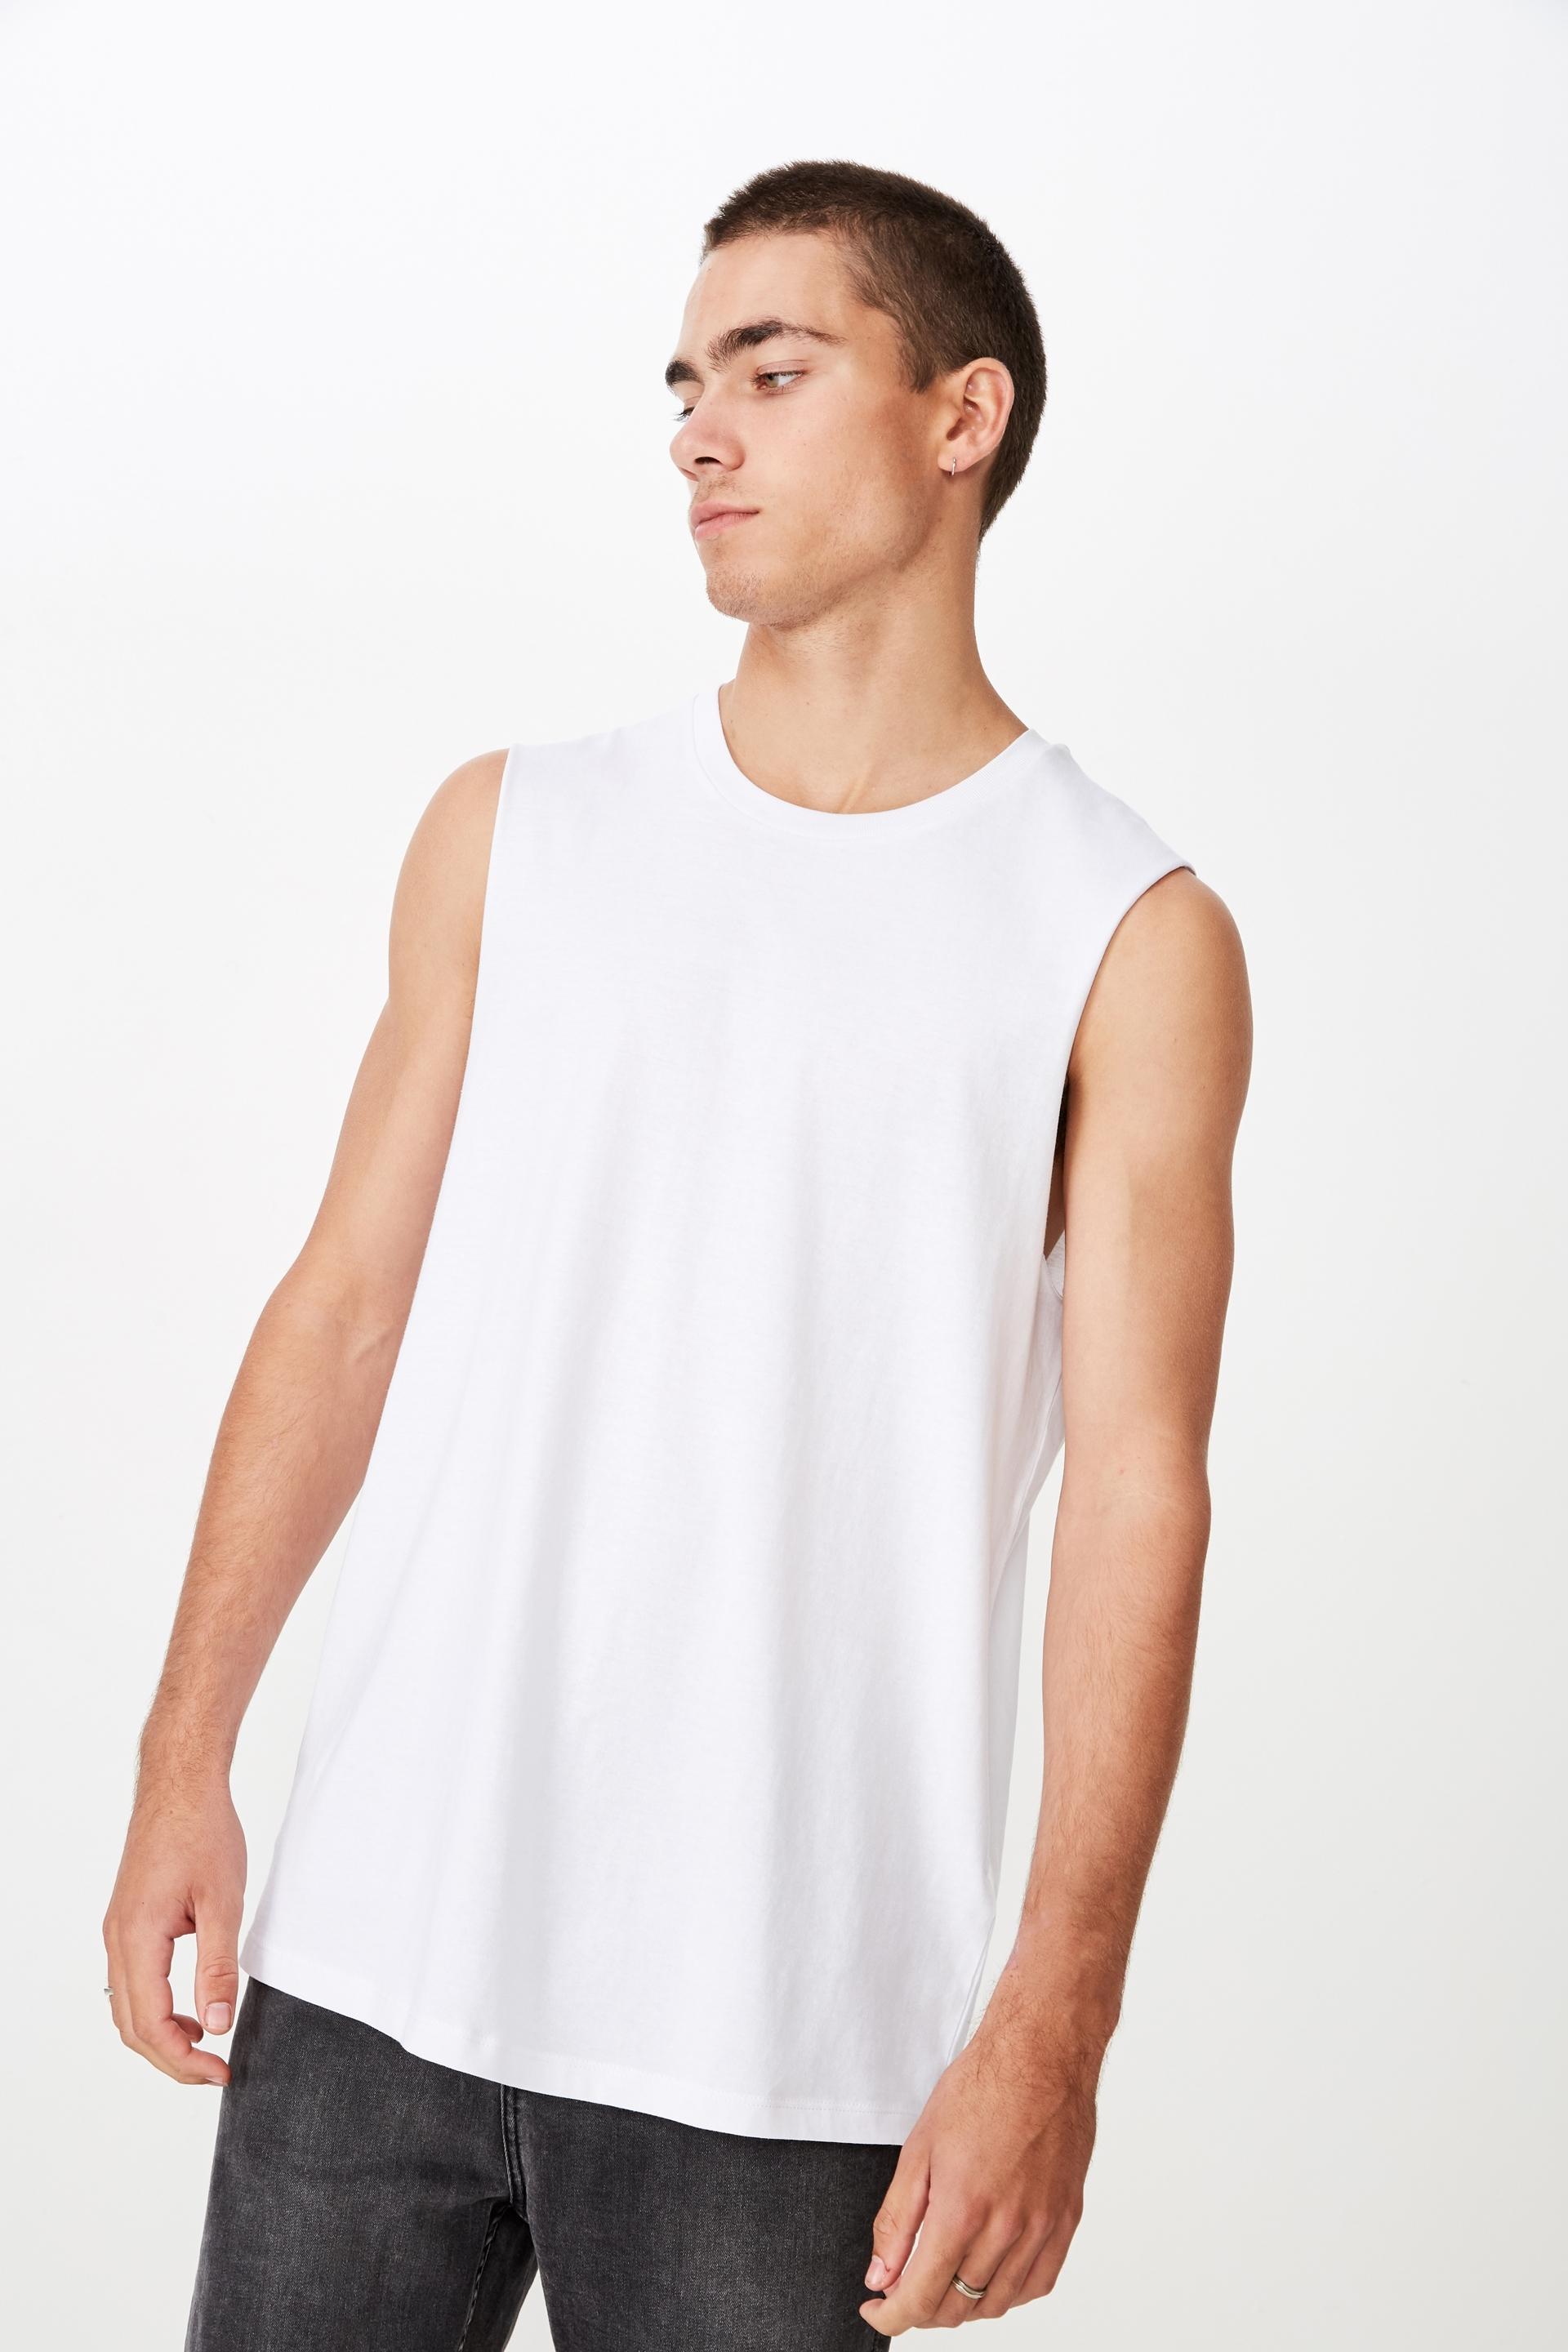 Essential muscle tank - white Cotton On T-Shirts & Vests | Superbalist.com